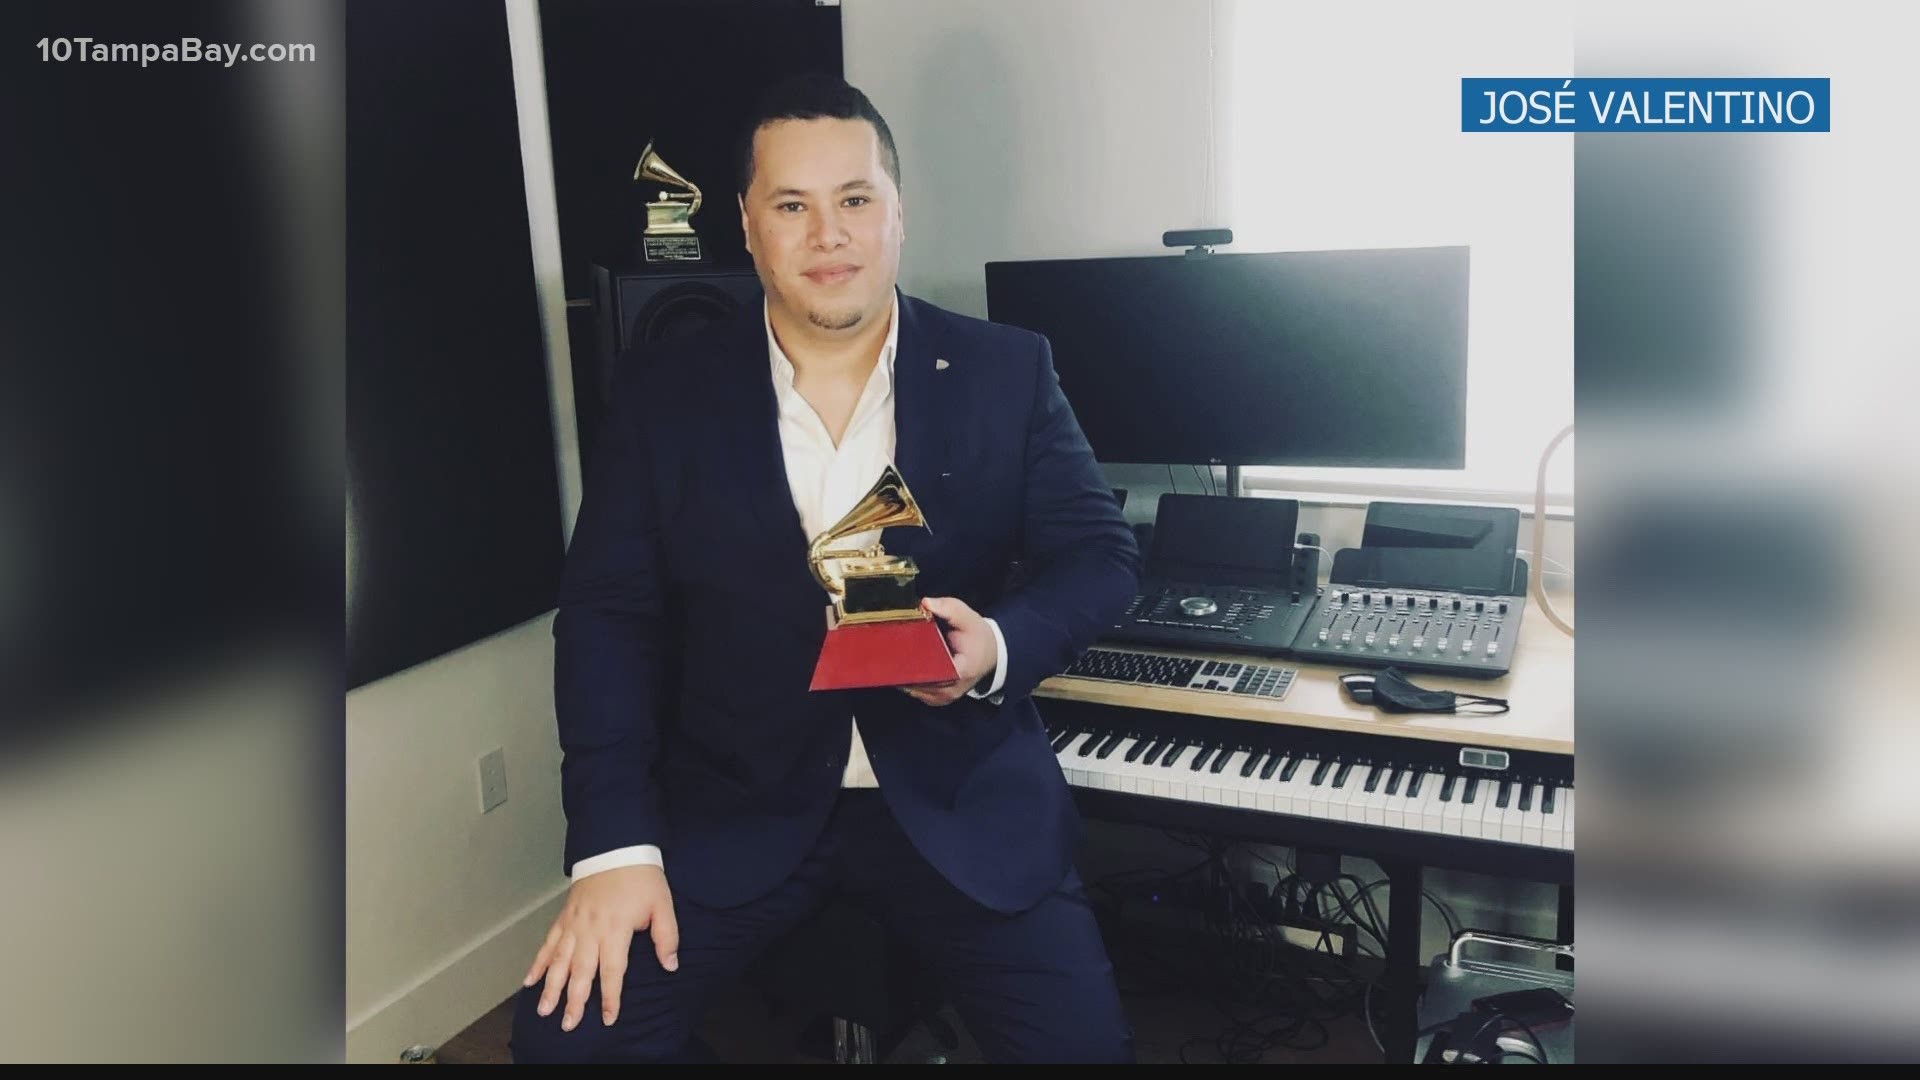 Dr. José Valentino Ruiz won the Latin Grammy with his friend and co-composer Carlos Fernando Lopez for their piece ‘Sacre.’